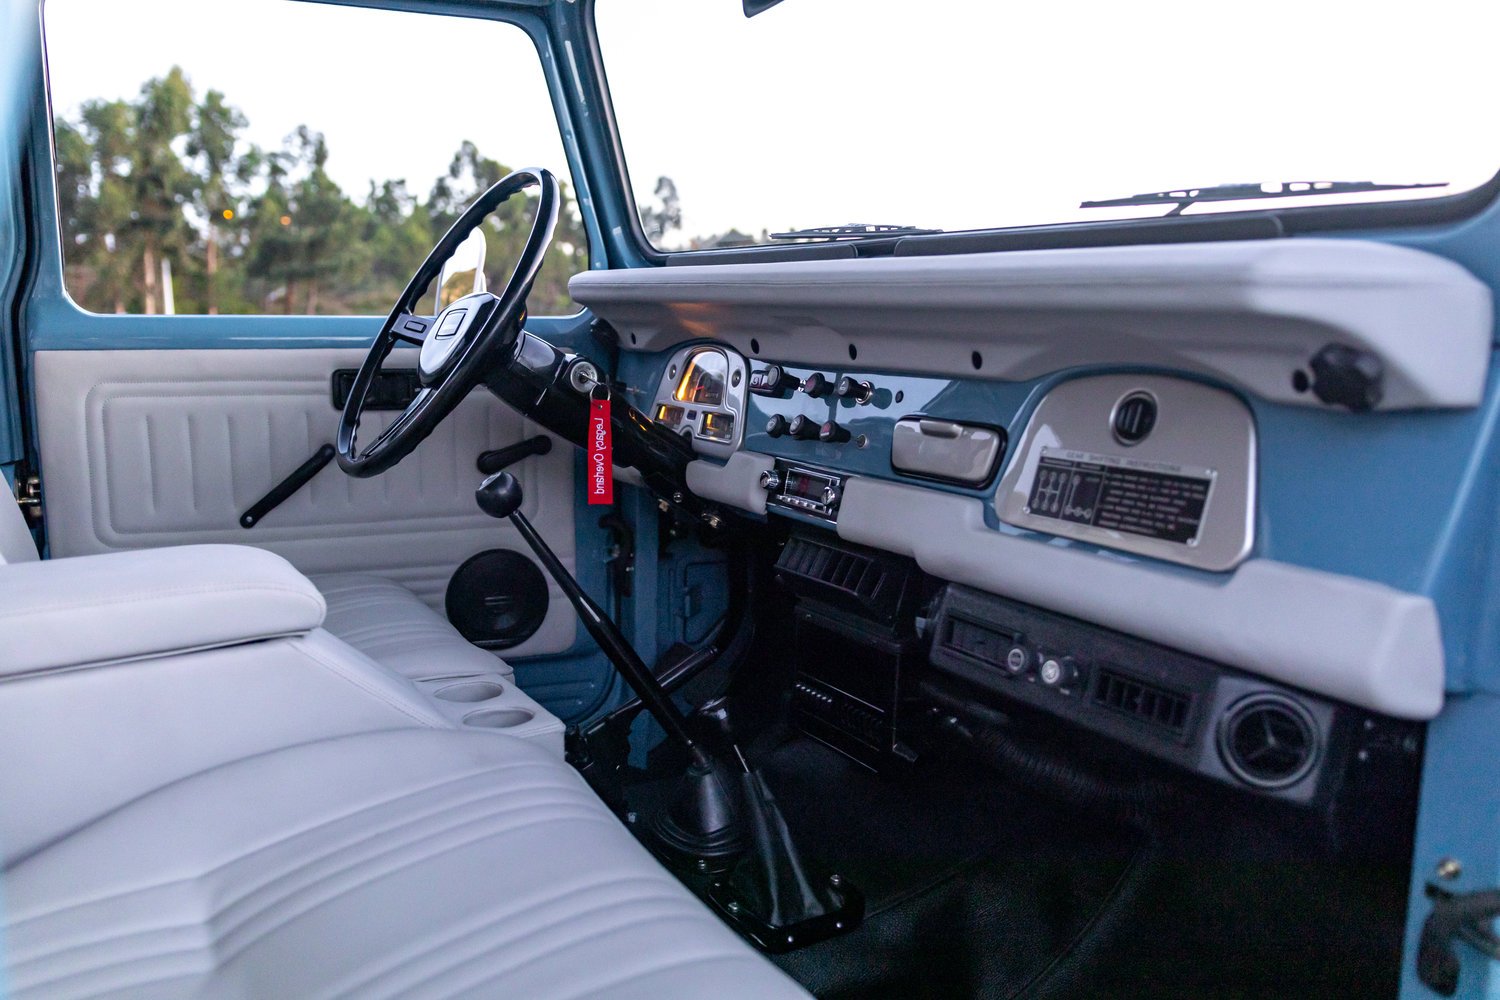 Step inside our meticulously restored 1981 Toyota Land Cruiser FJ40 interior, where every detail speaks of timeless craftsmanship and dedication. 

Looking to revamp your classic? Contact us today and explore the legacy.

#toyota #landcruiser #fj40 #